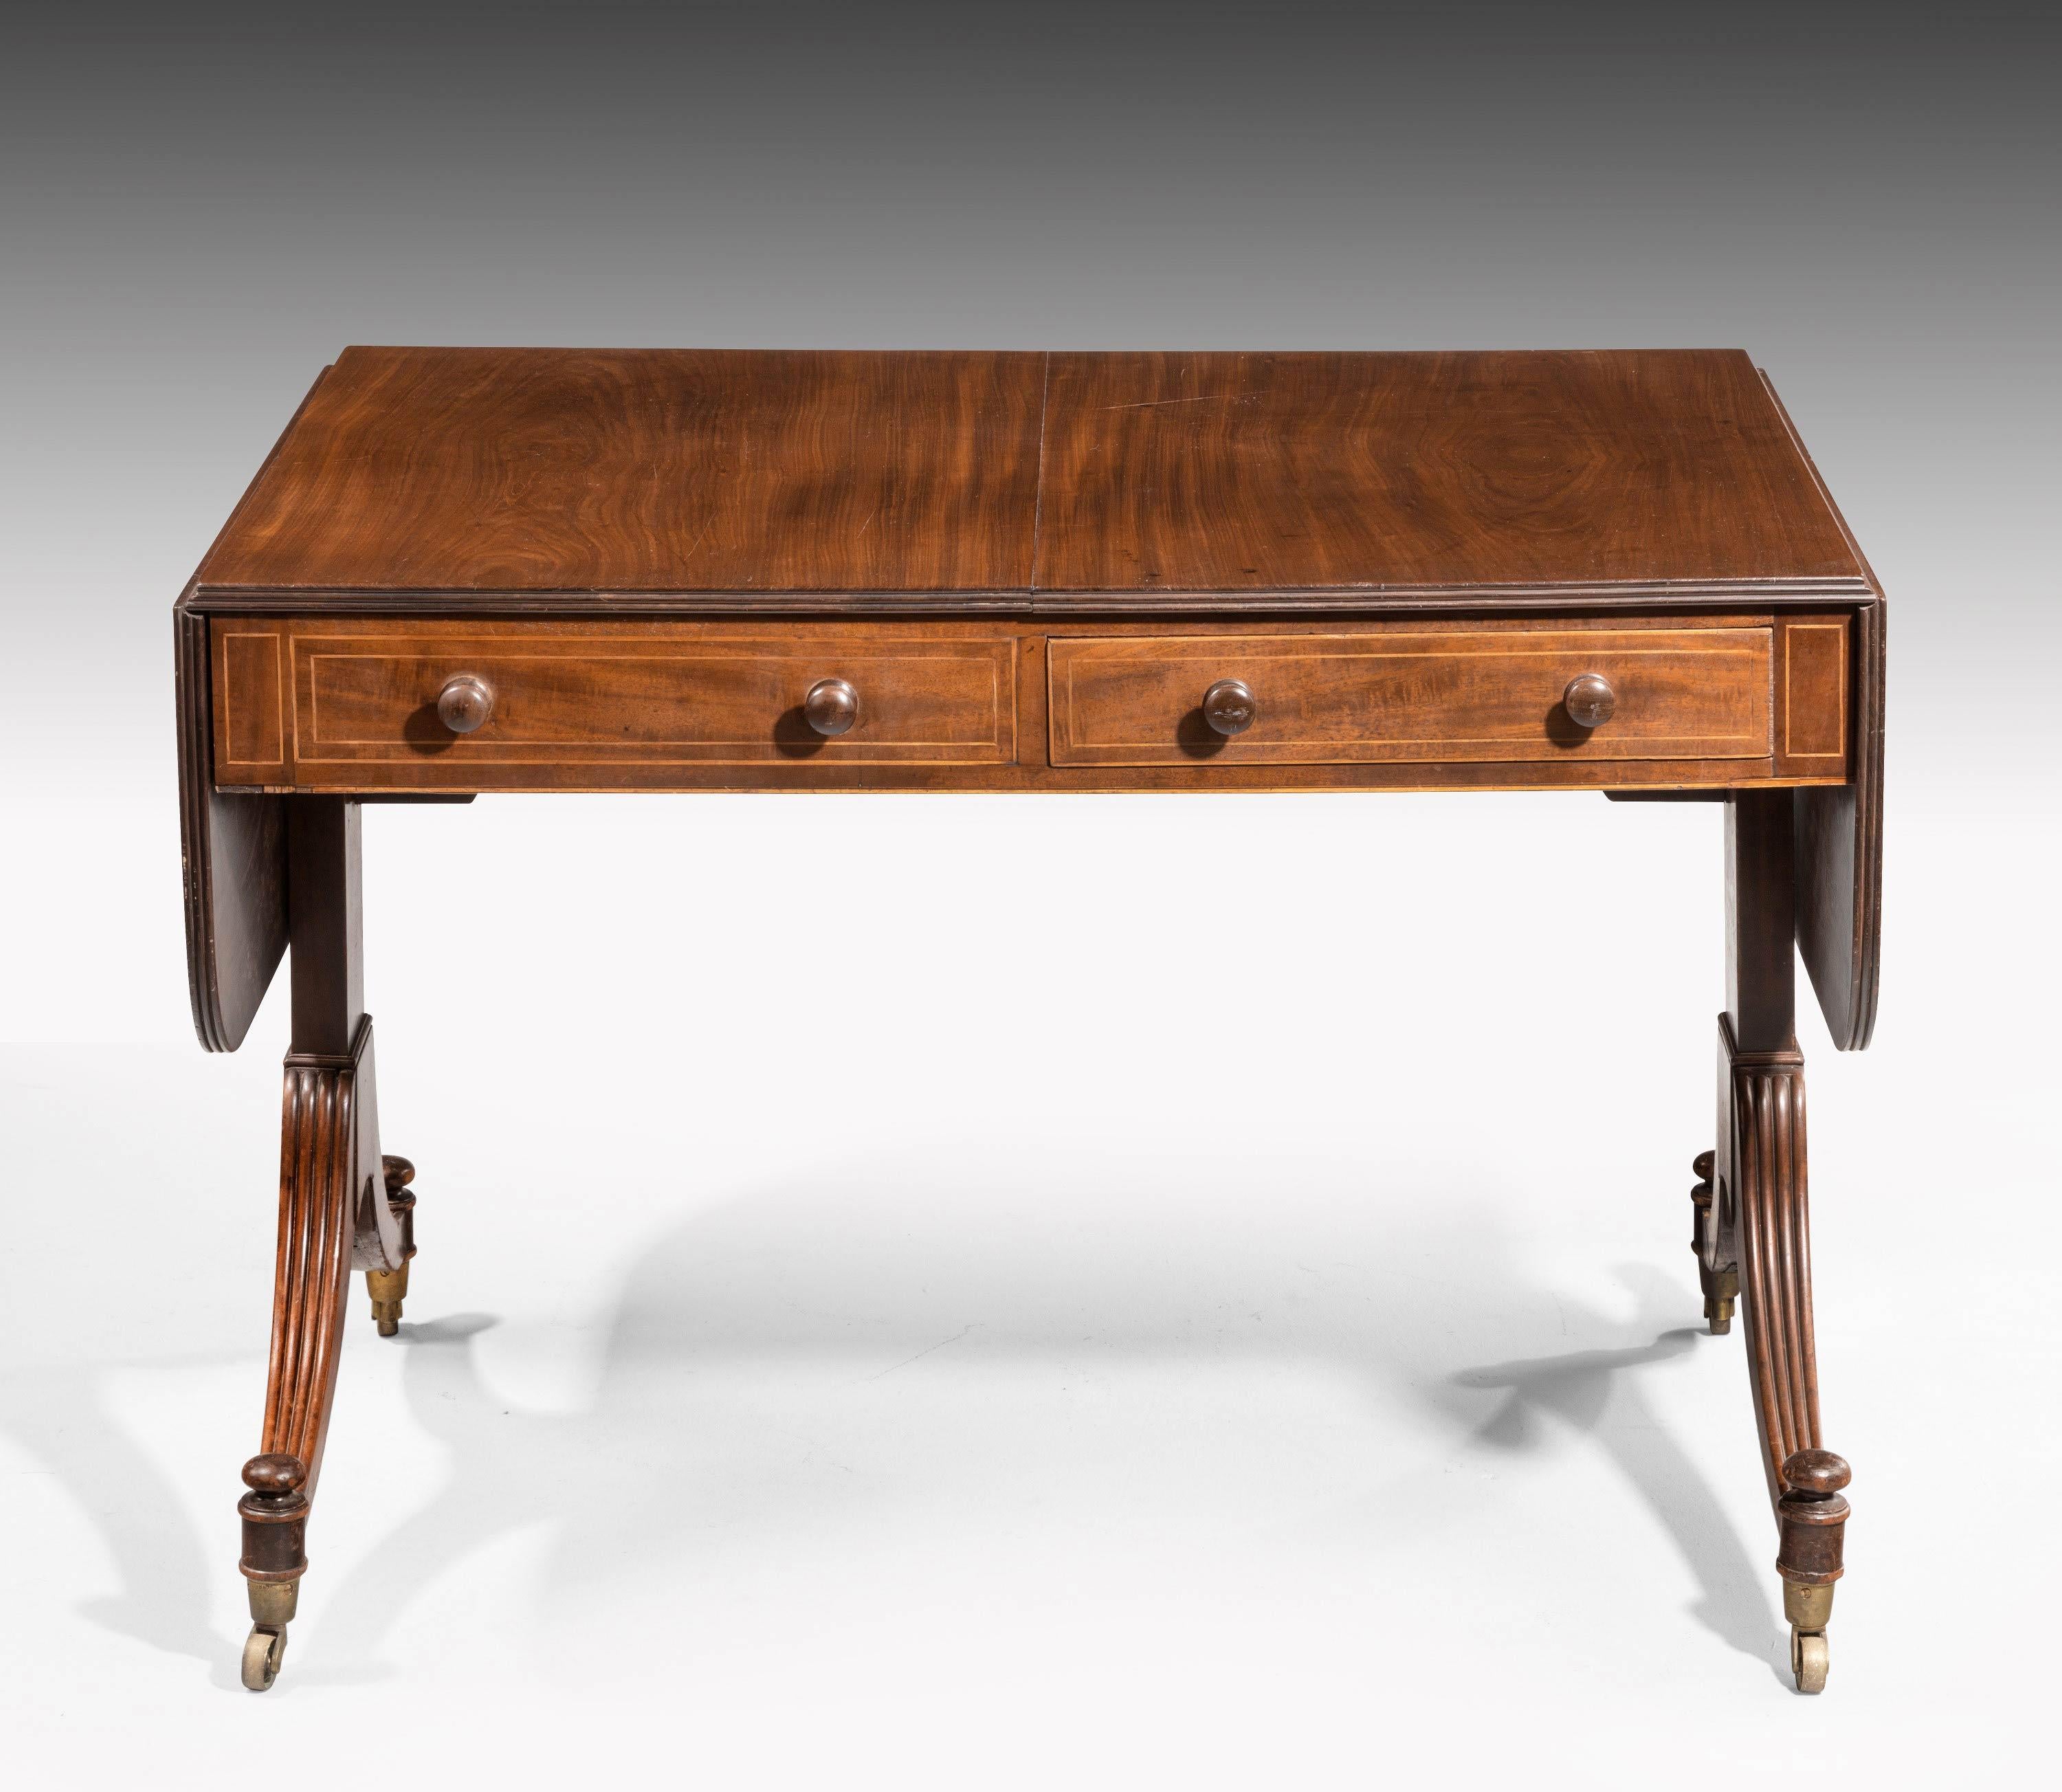 Early 19th Century Small, Attractive George III Period Mahogany Side Table on Cabriole Supports